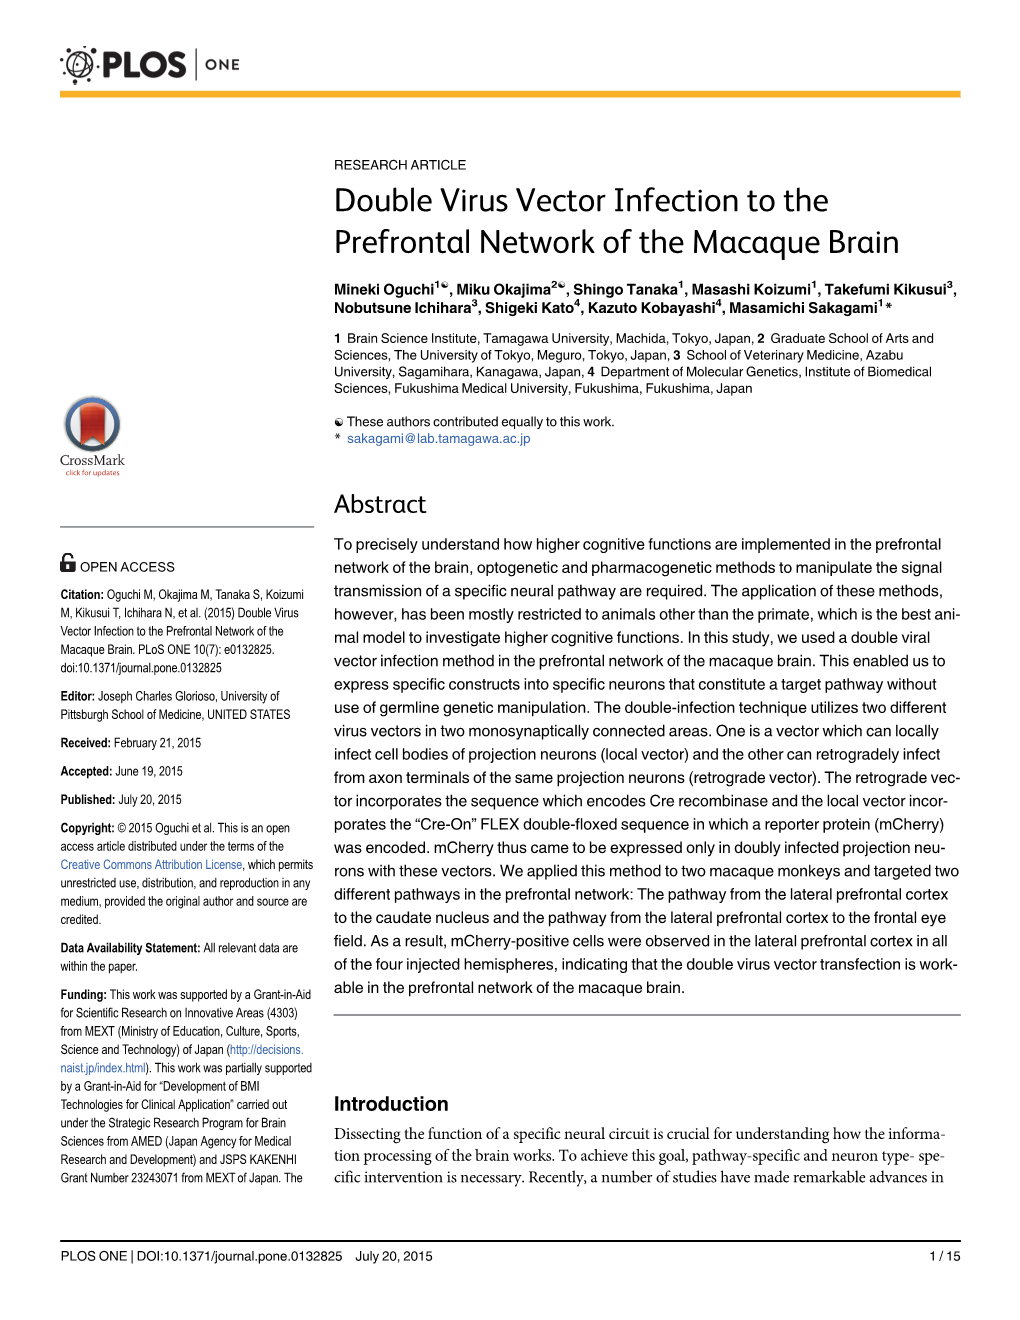 Double Virus Vector Infection to the Prefrontal Network of the Macaque Brain